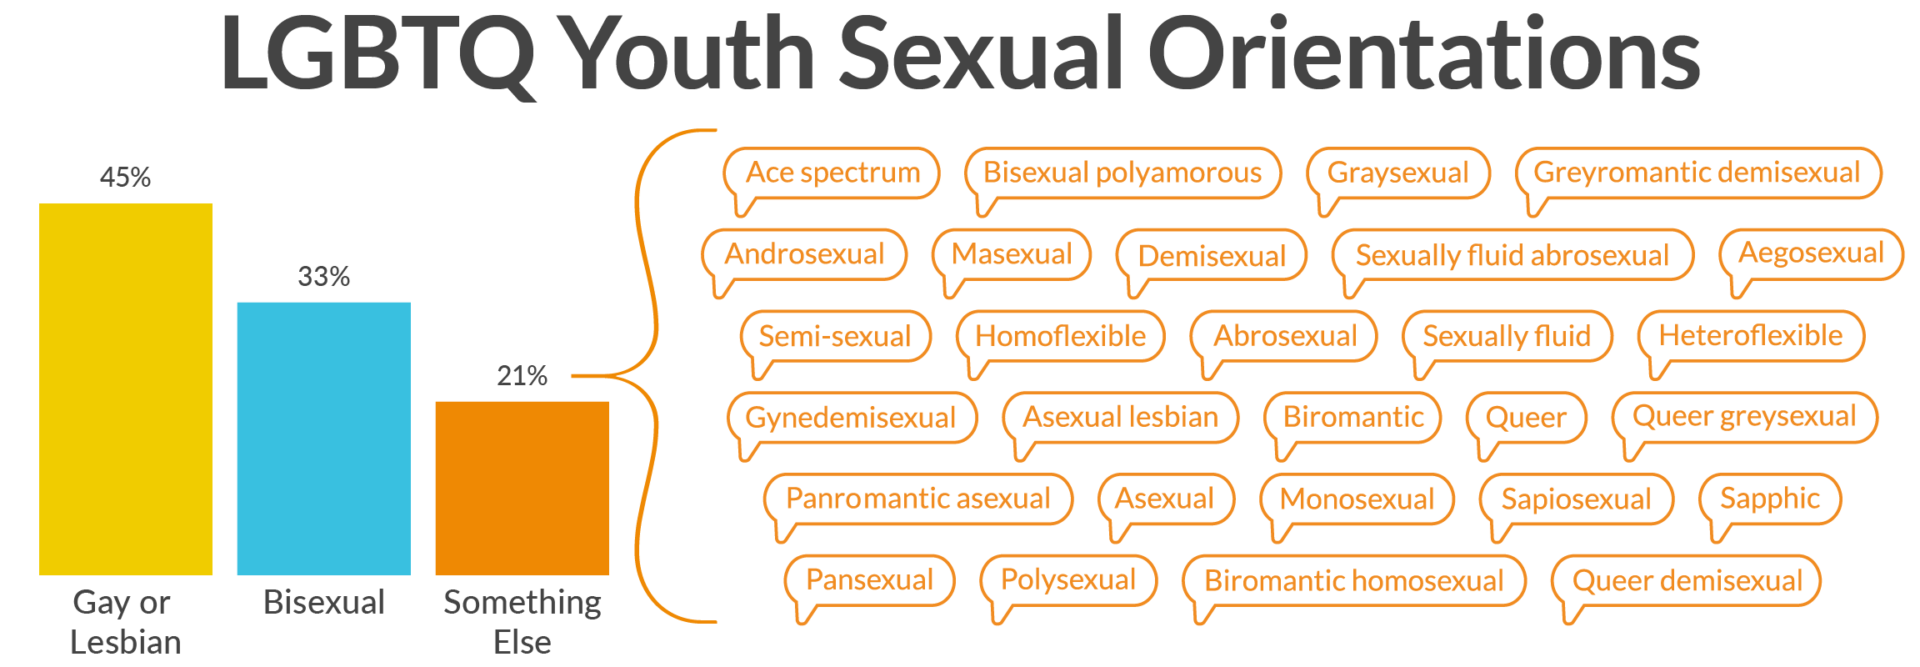 Robust evidence for bisexual orientation among men